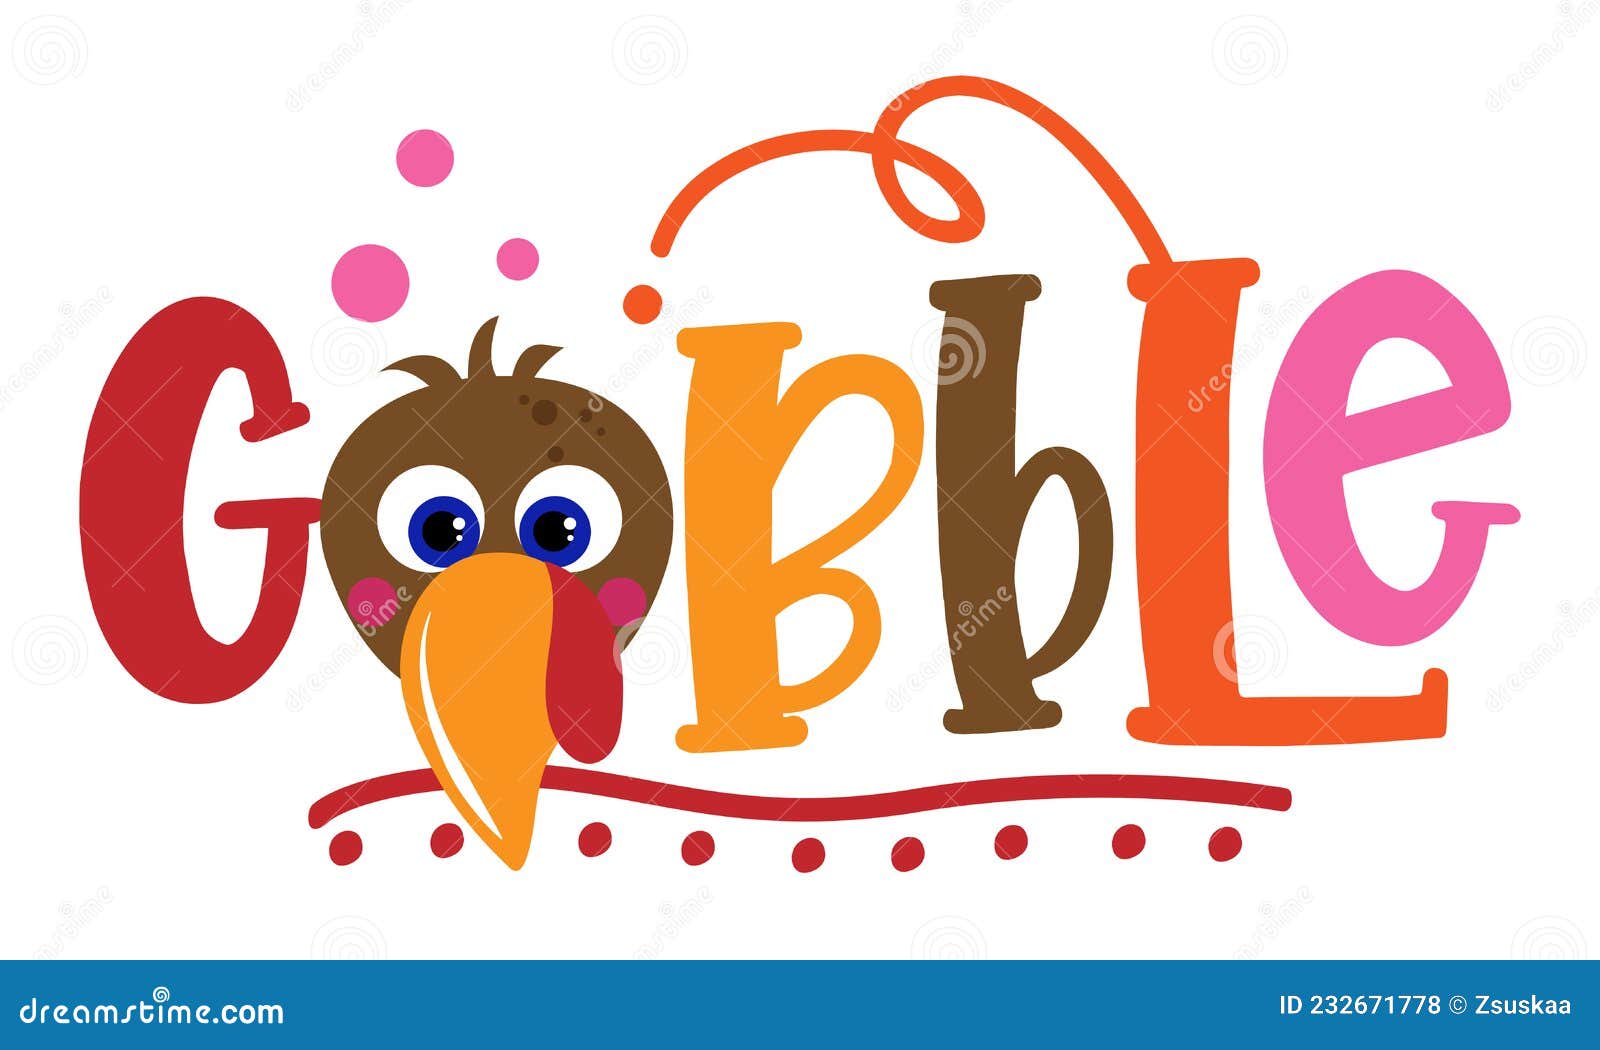 gobble til you wobble - thanksgiving day calligraphic poster. autumn color poster.